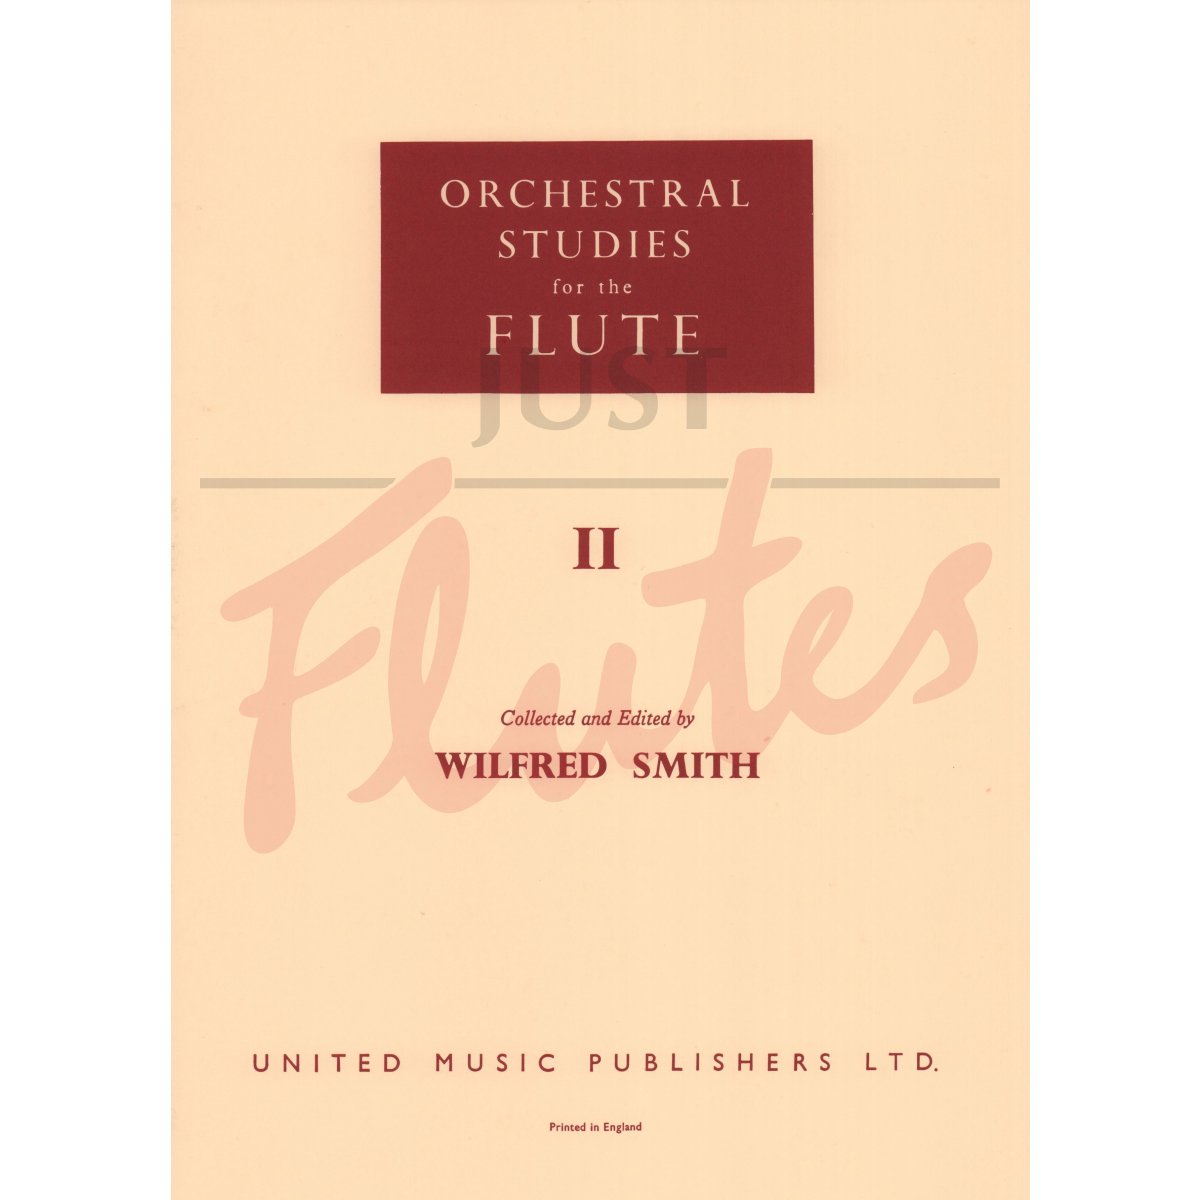 Orchestral Studies for the Flute, Volume 2: Overtures